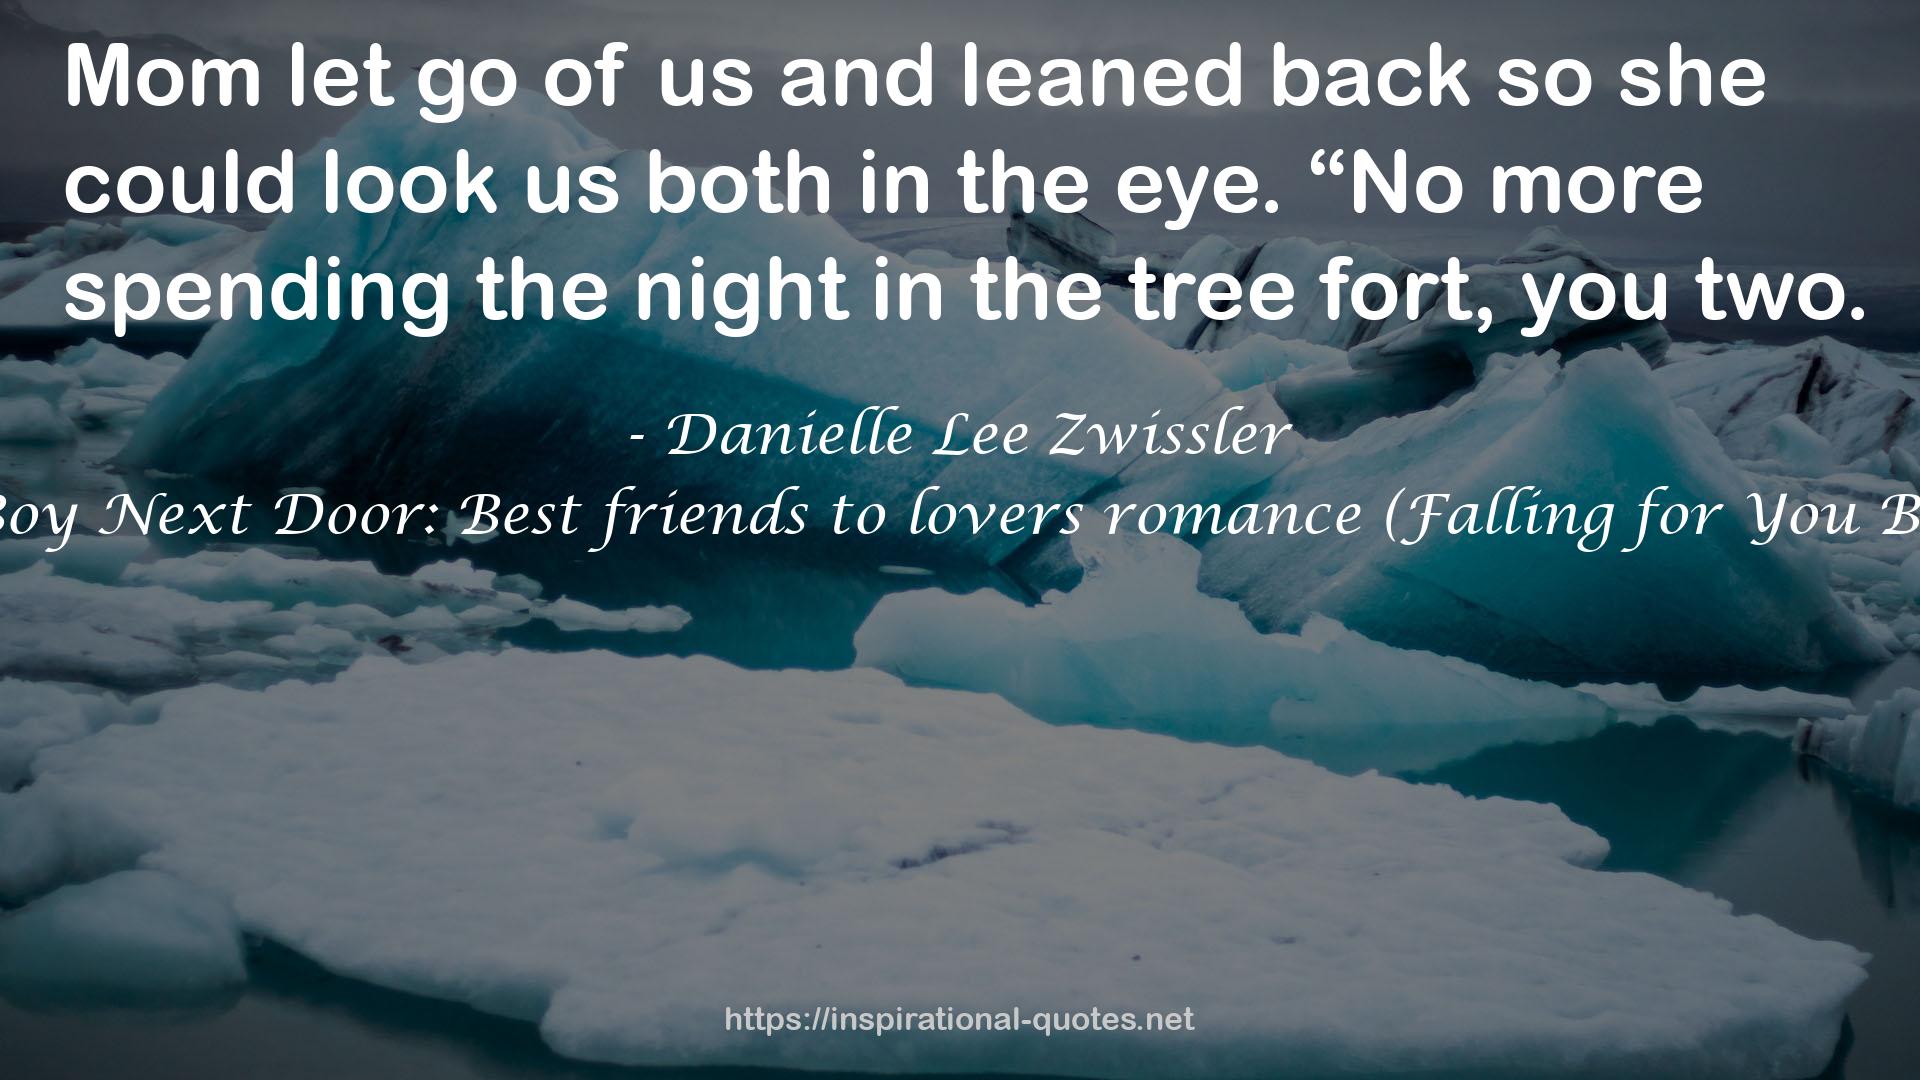 The Boy Next Door: Best friends to lovers romance (Falling for You Book 1) QUOTES